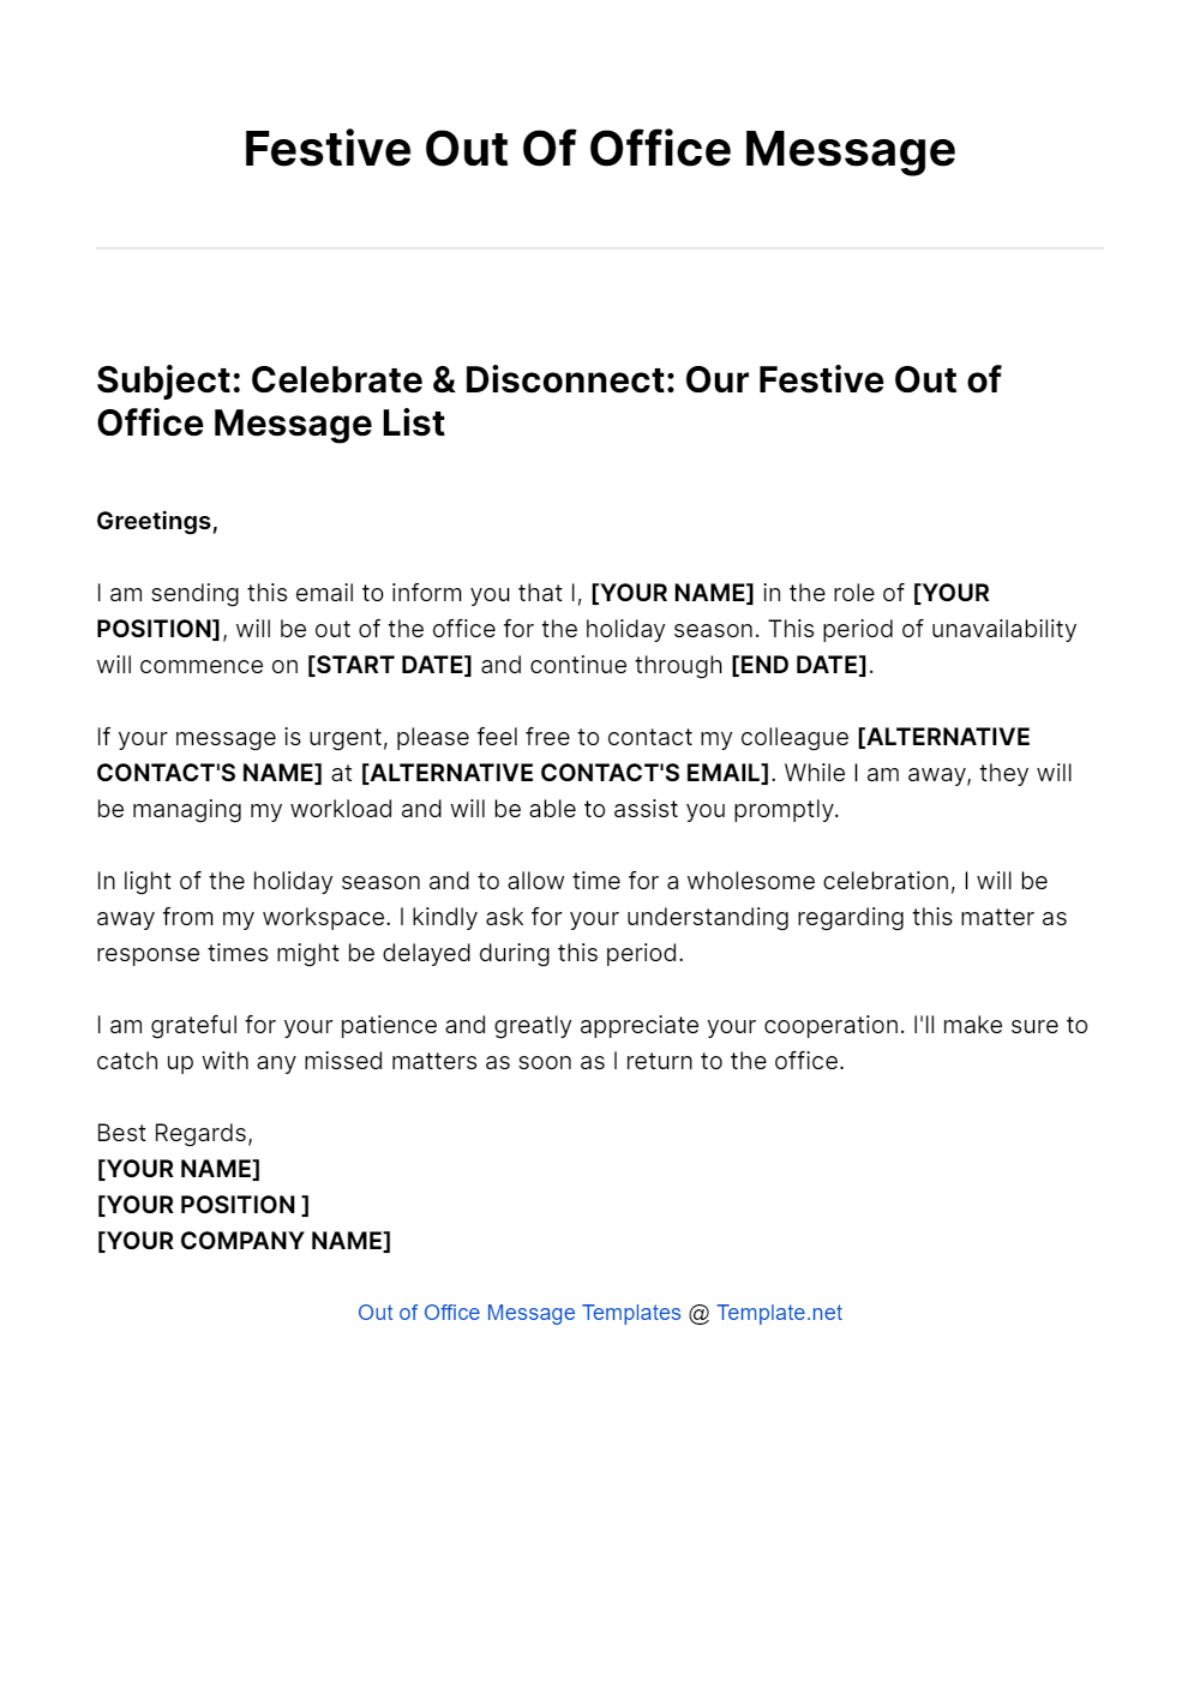 Festive Out Of Office Message Template